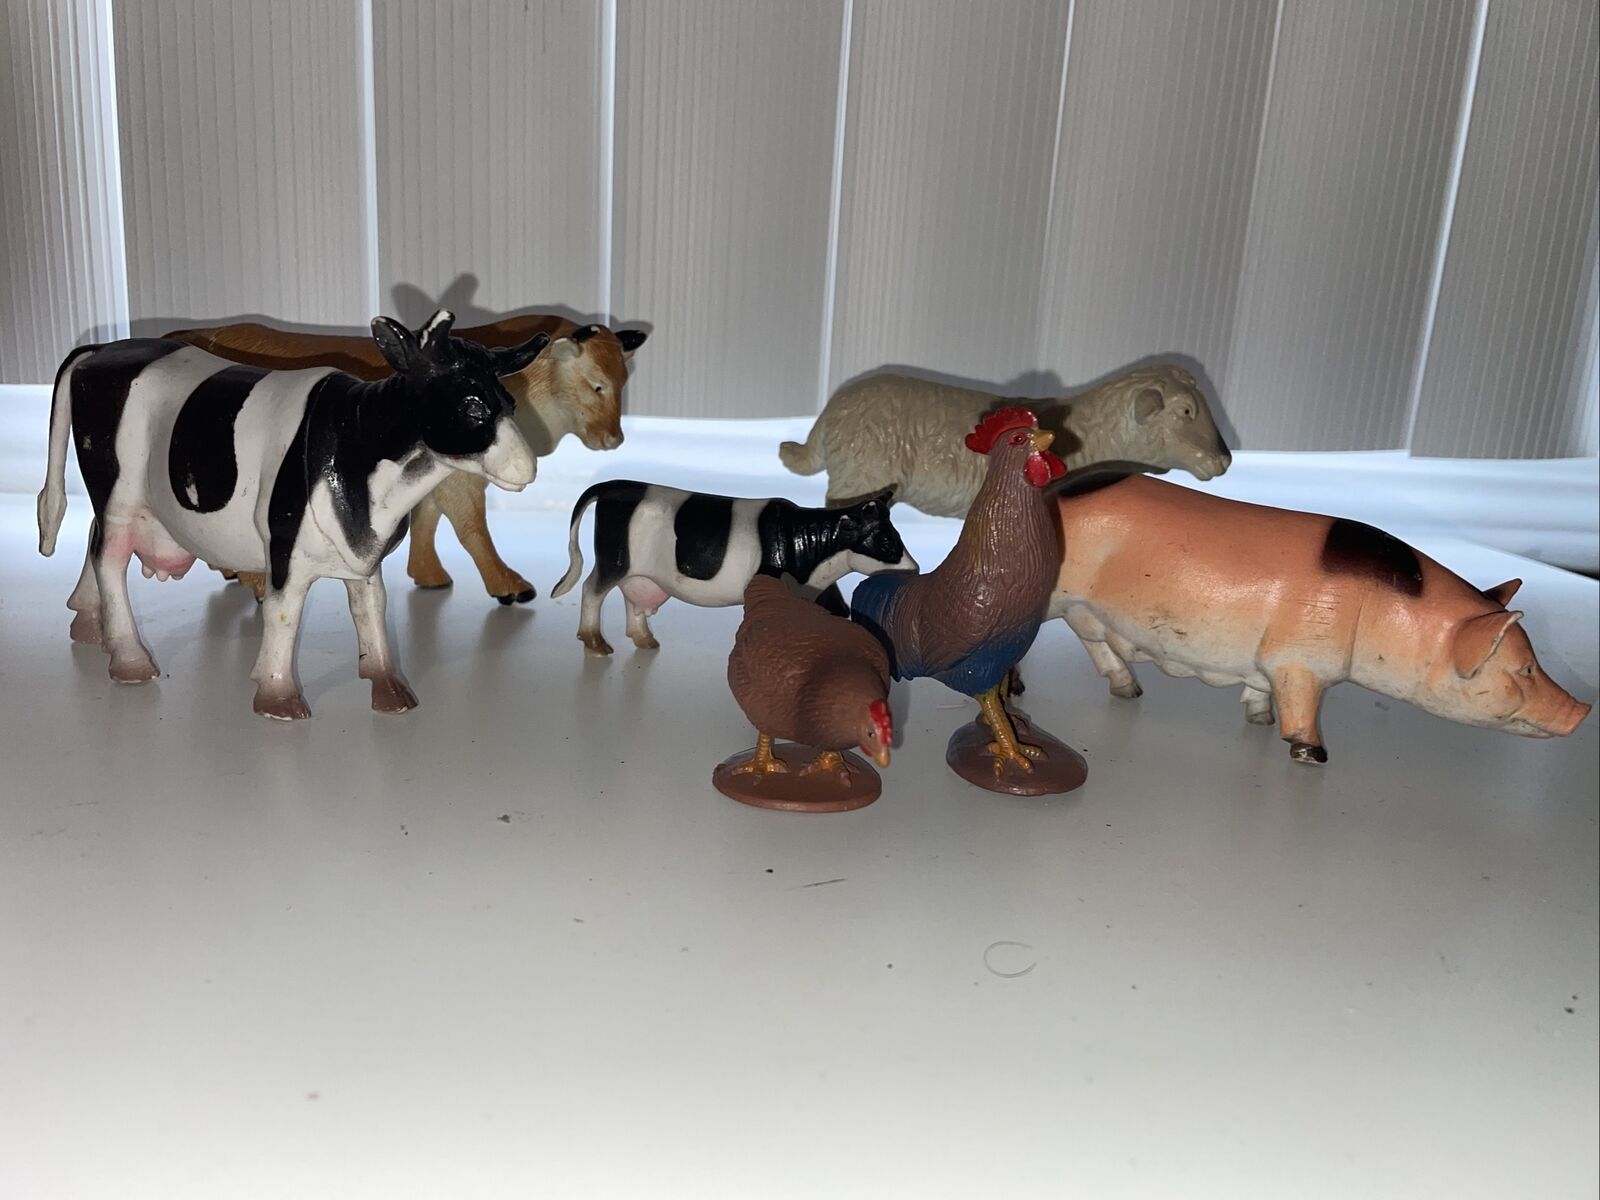 1999 Farm/Barn Animals Toy Figures Lot Of 7 2 Cows Pig Sheep Bull 2 Roosters